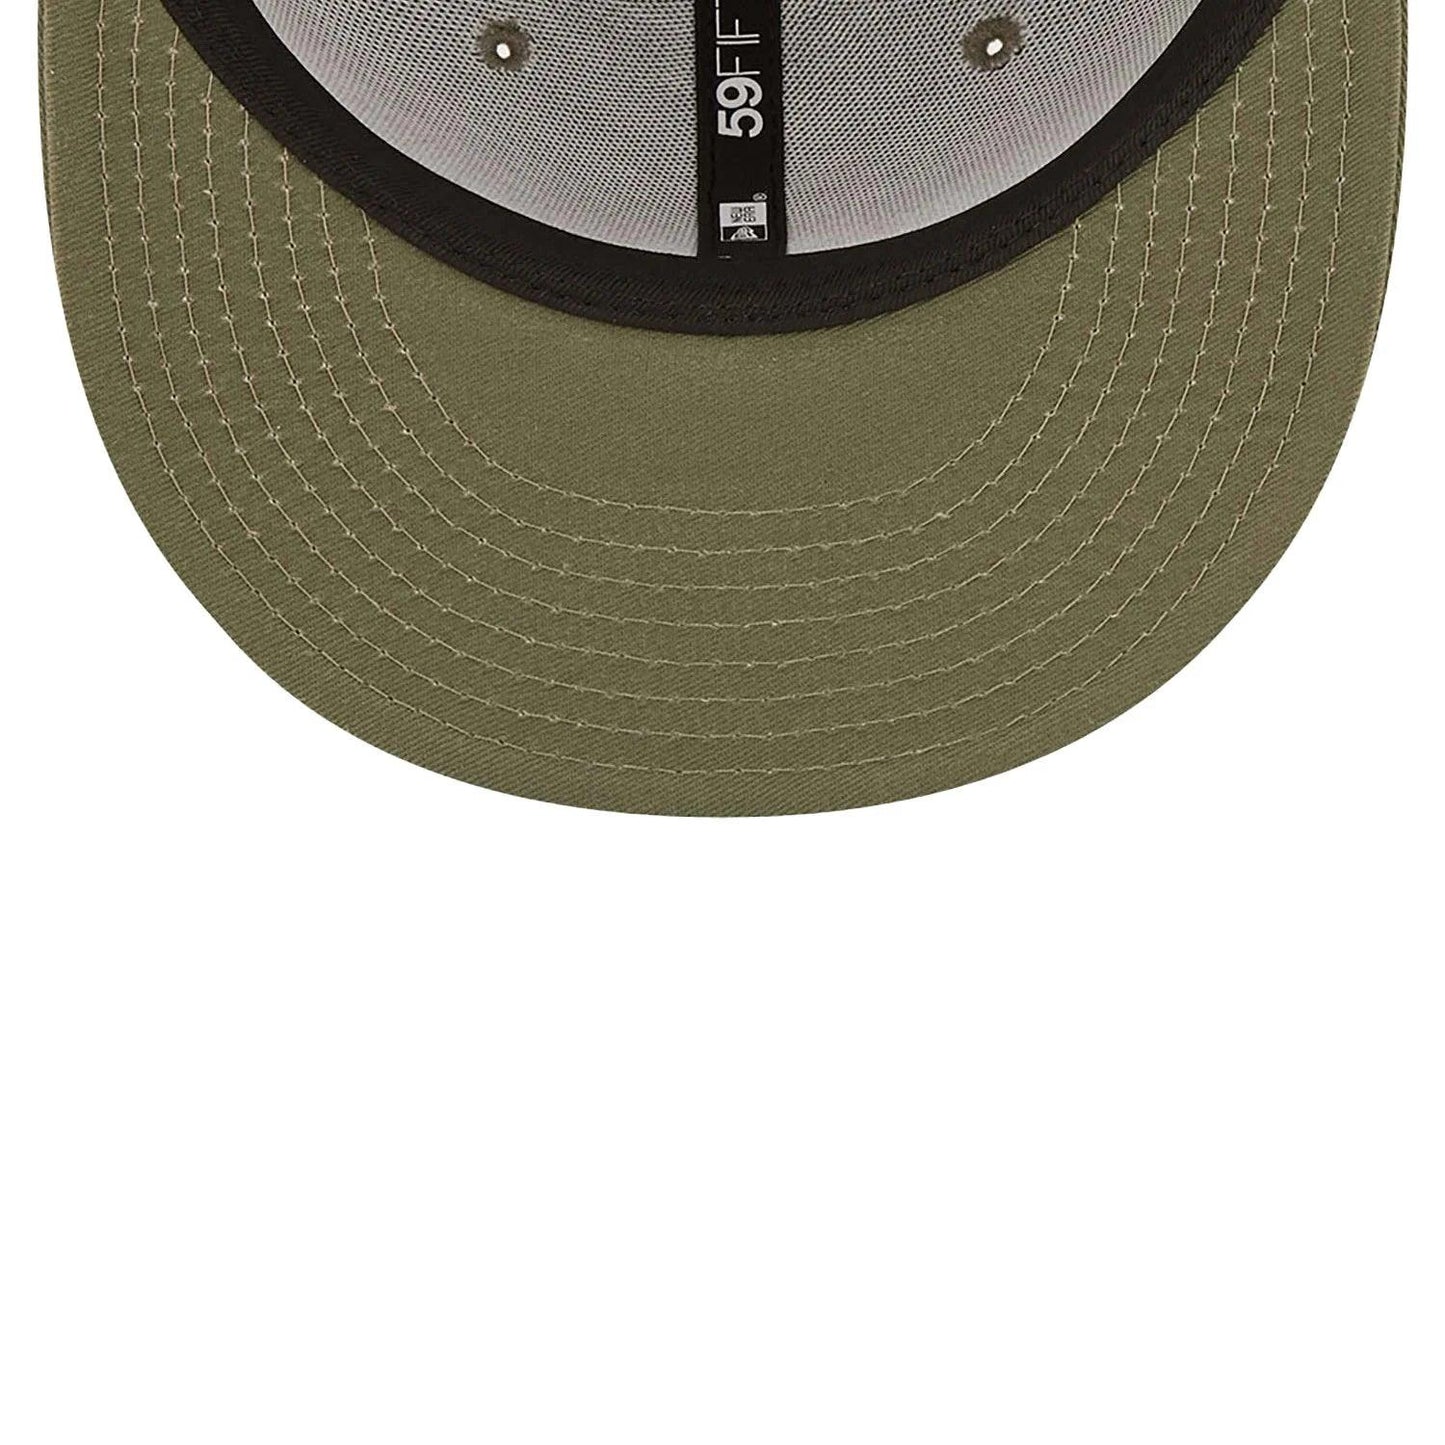 NEW ERA 59FIFTY MLB LOS ANGELES DODGERS TEAM OUTLINE OLIVE / OLIVE UV FITTED CAP